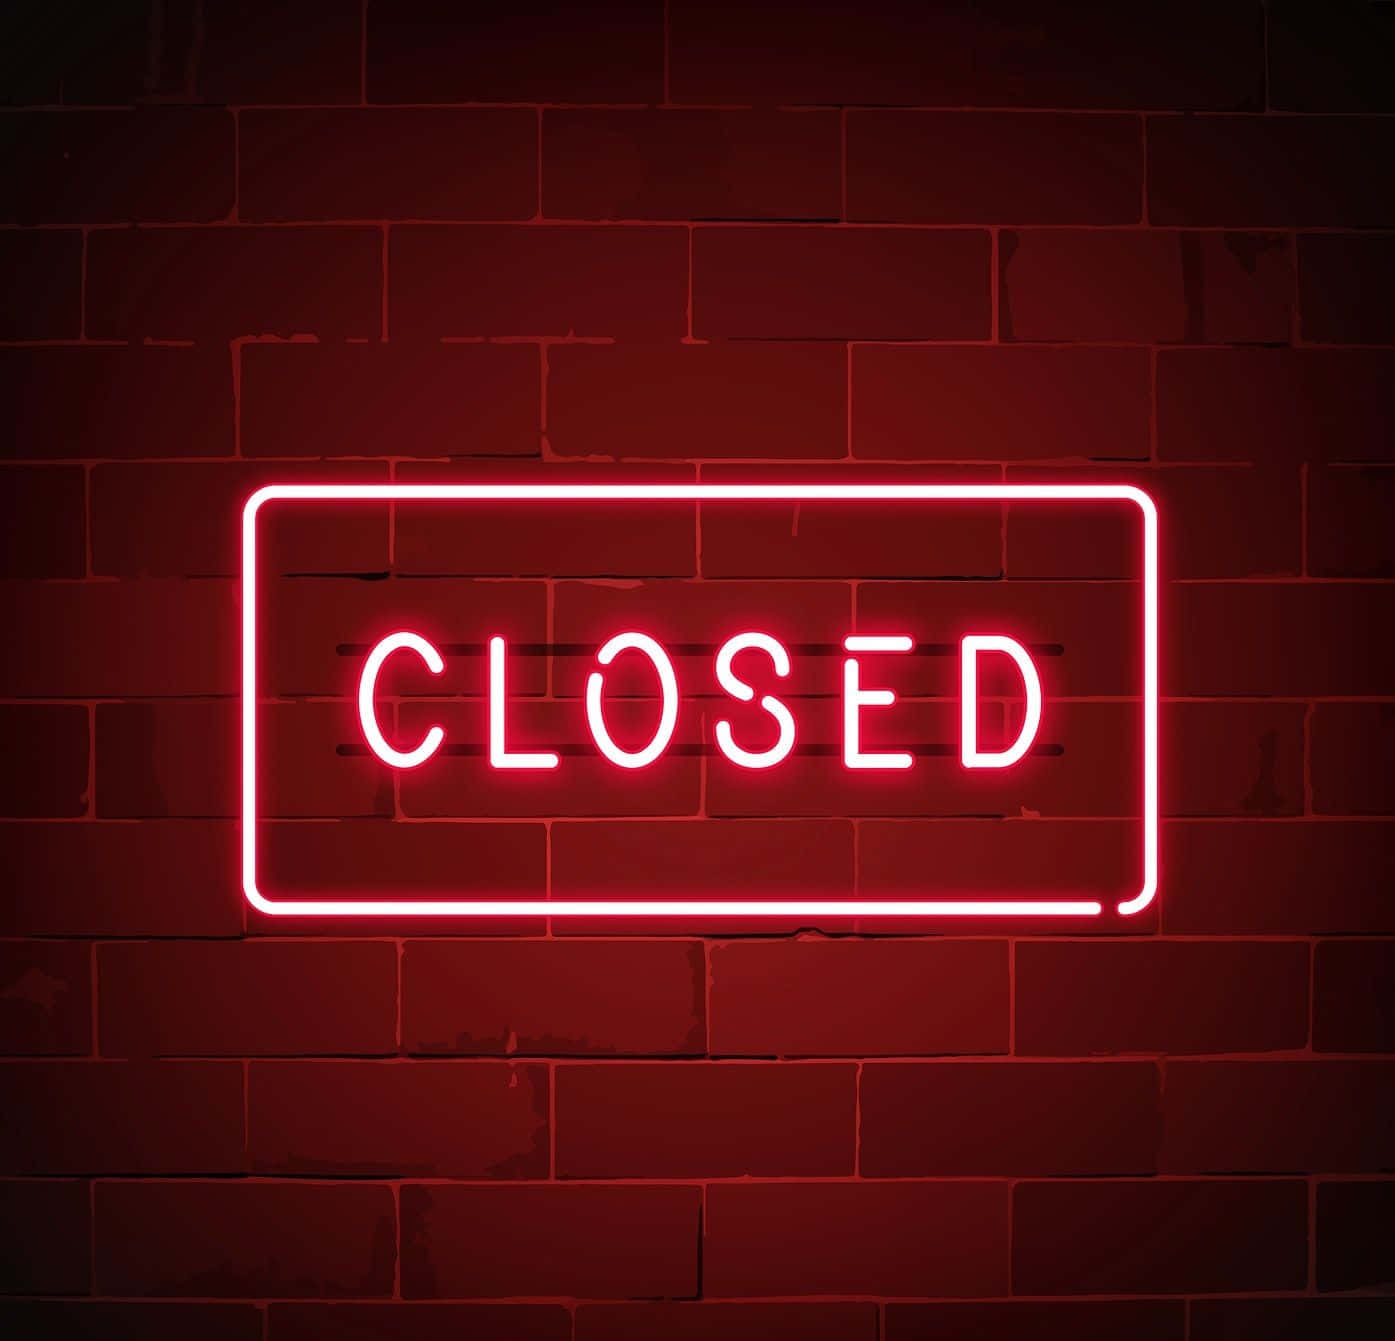 Closed Neon Sign On Brick Wall Wallpaper